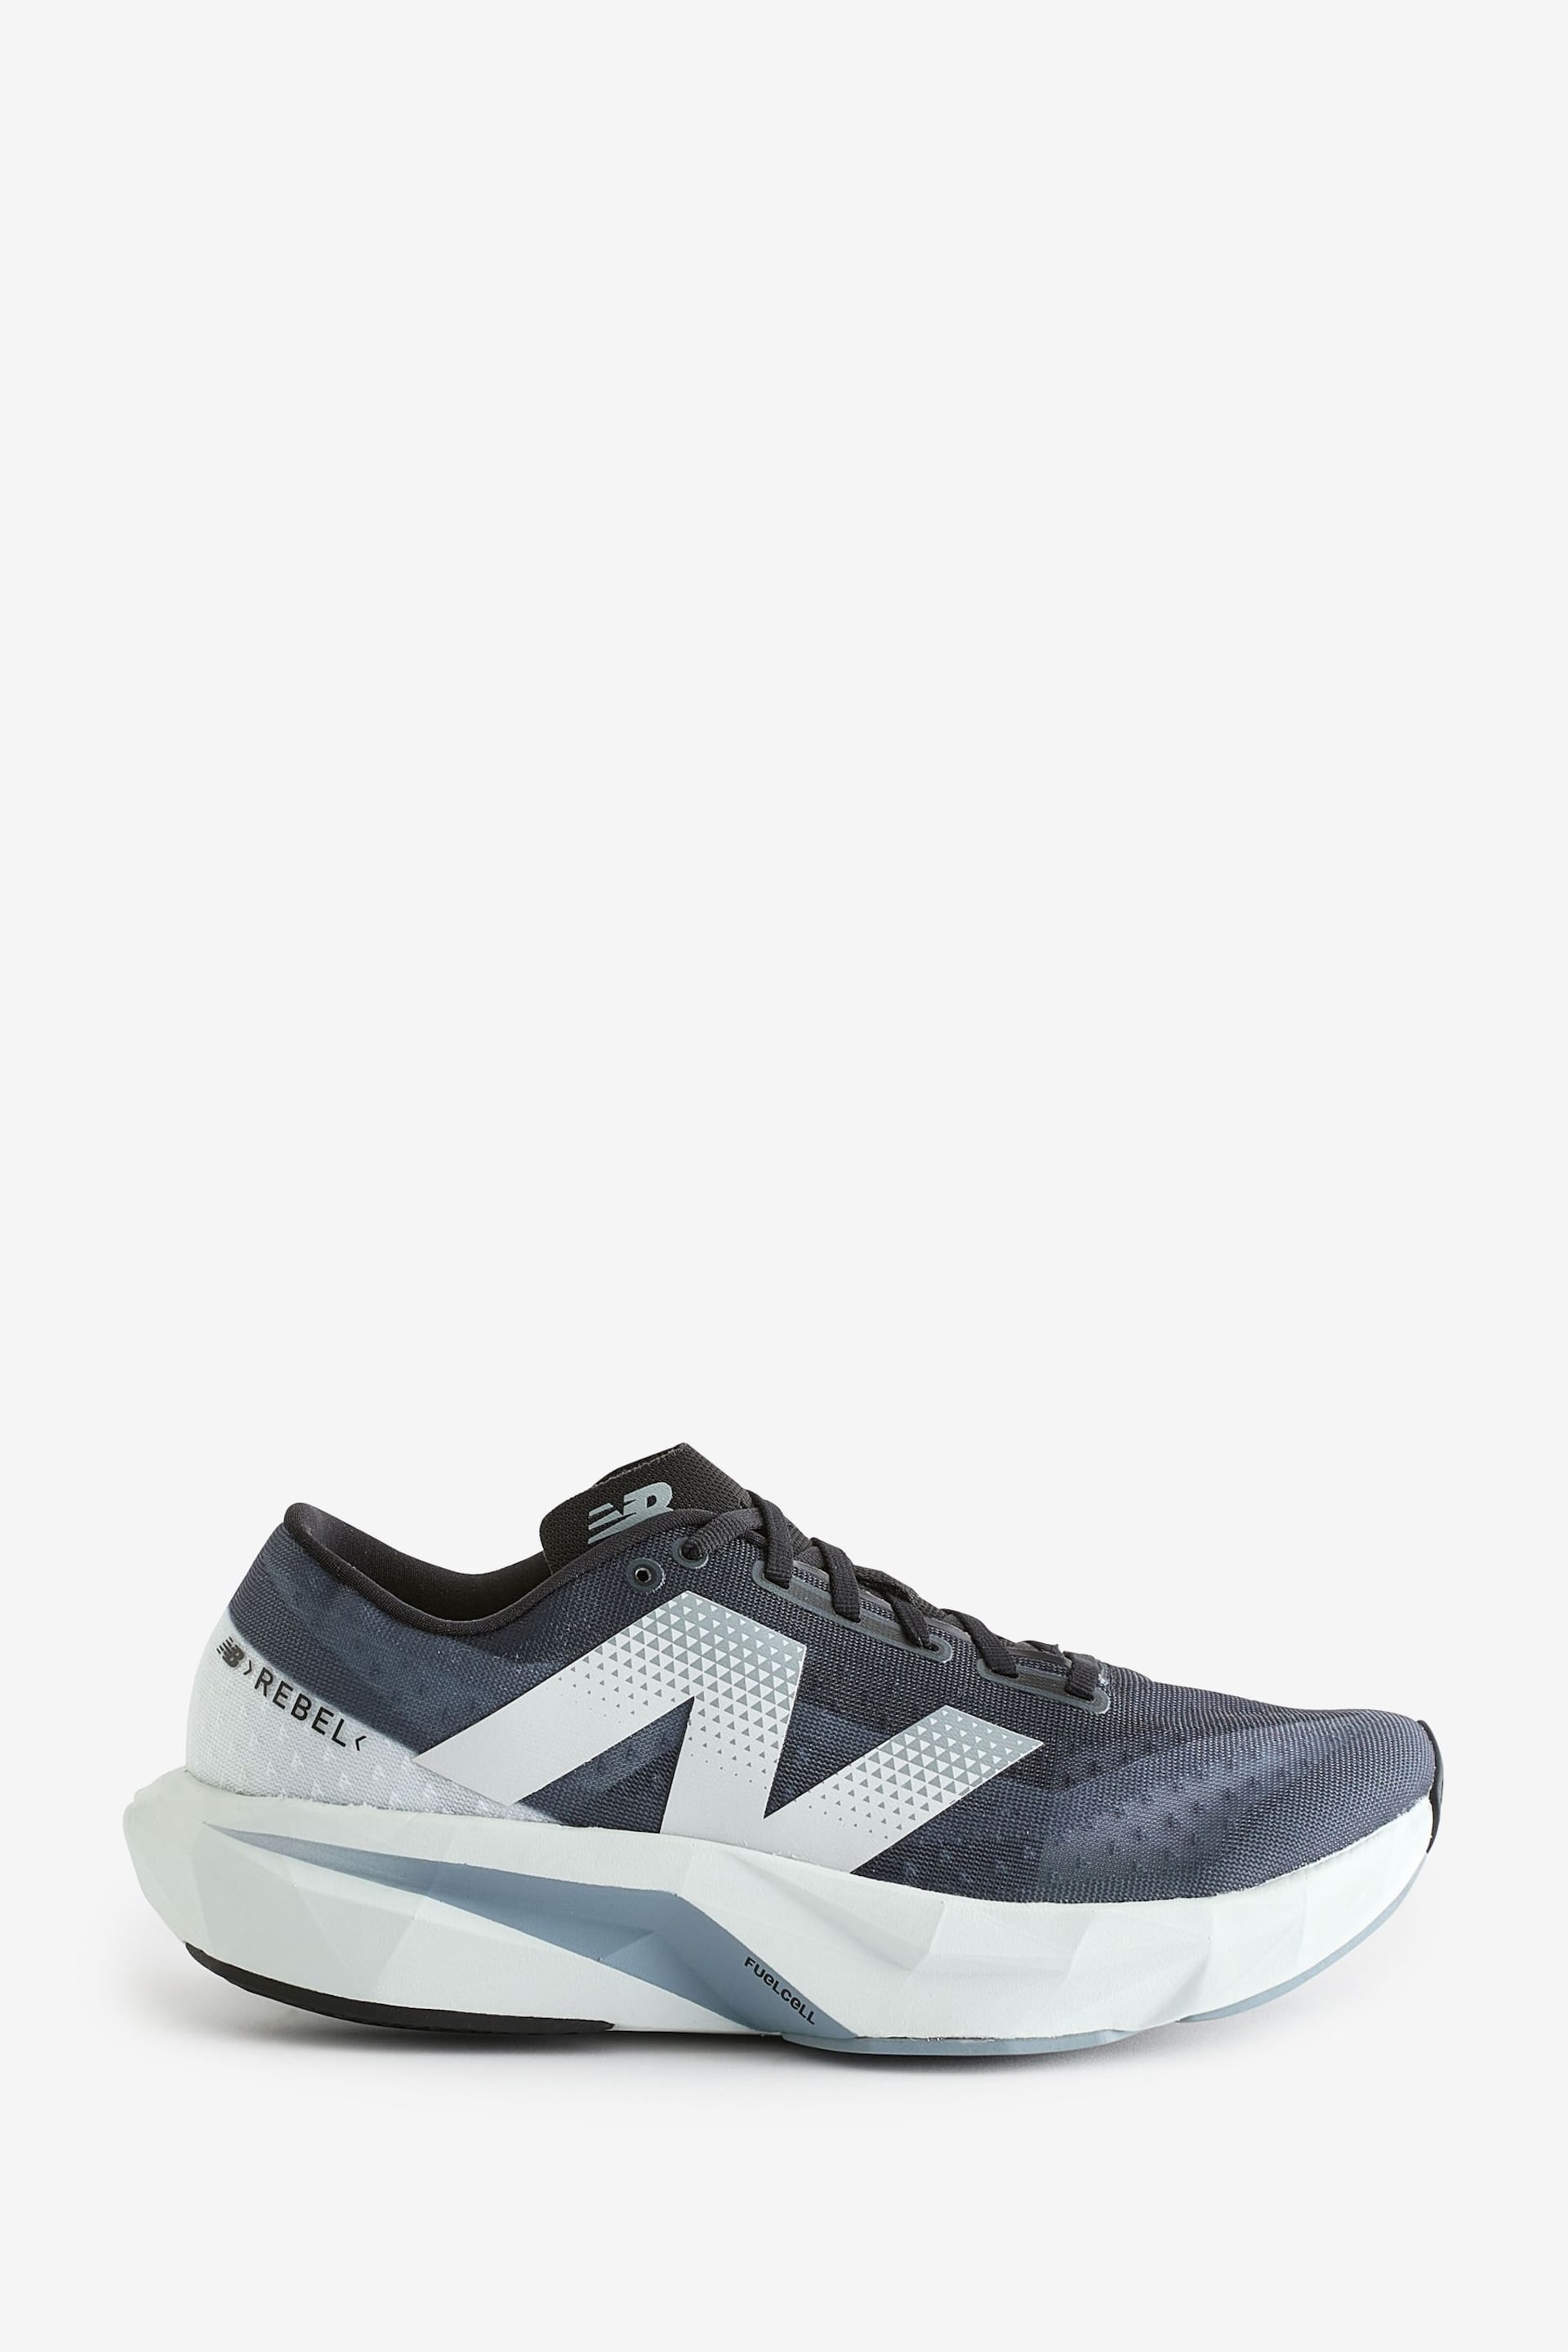 New Balance Grey Mens Fuelcell Rebel Trainers - Image 1 of 12